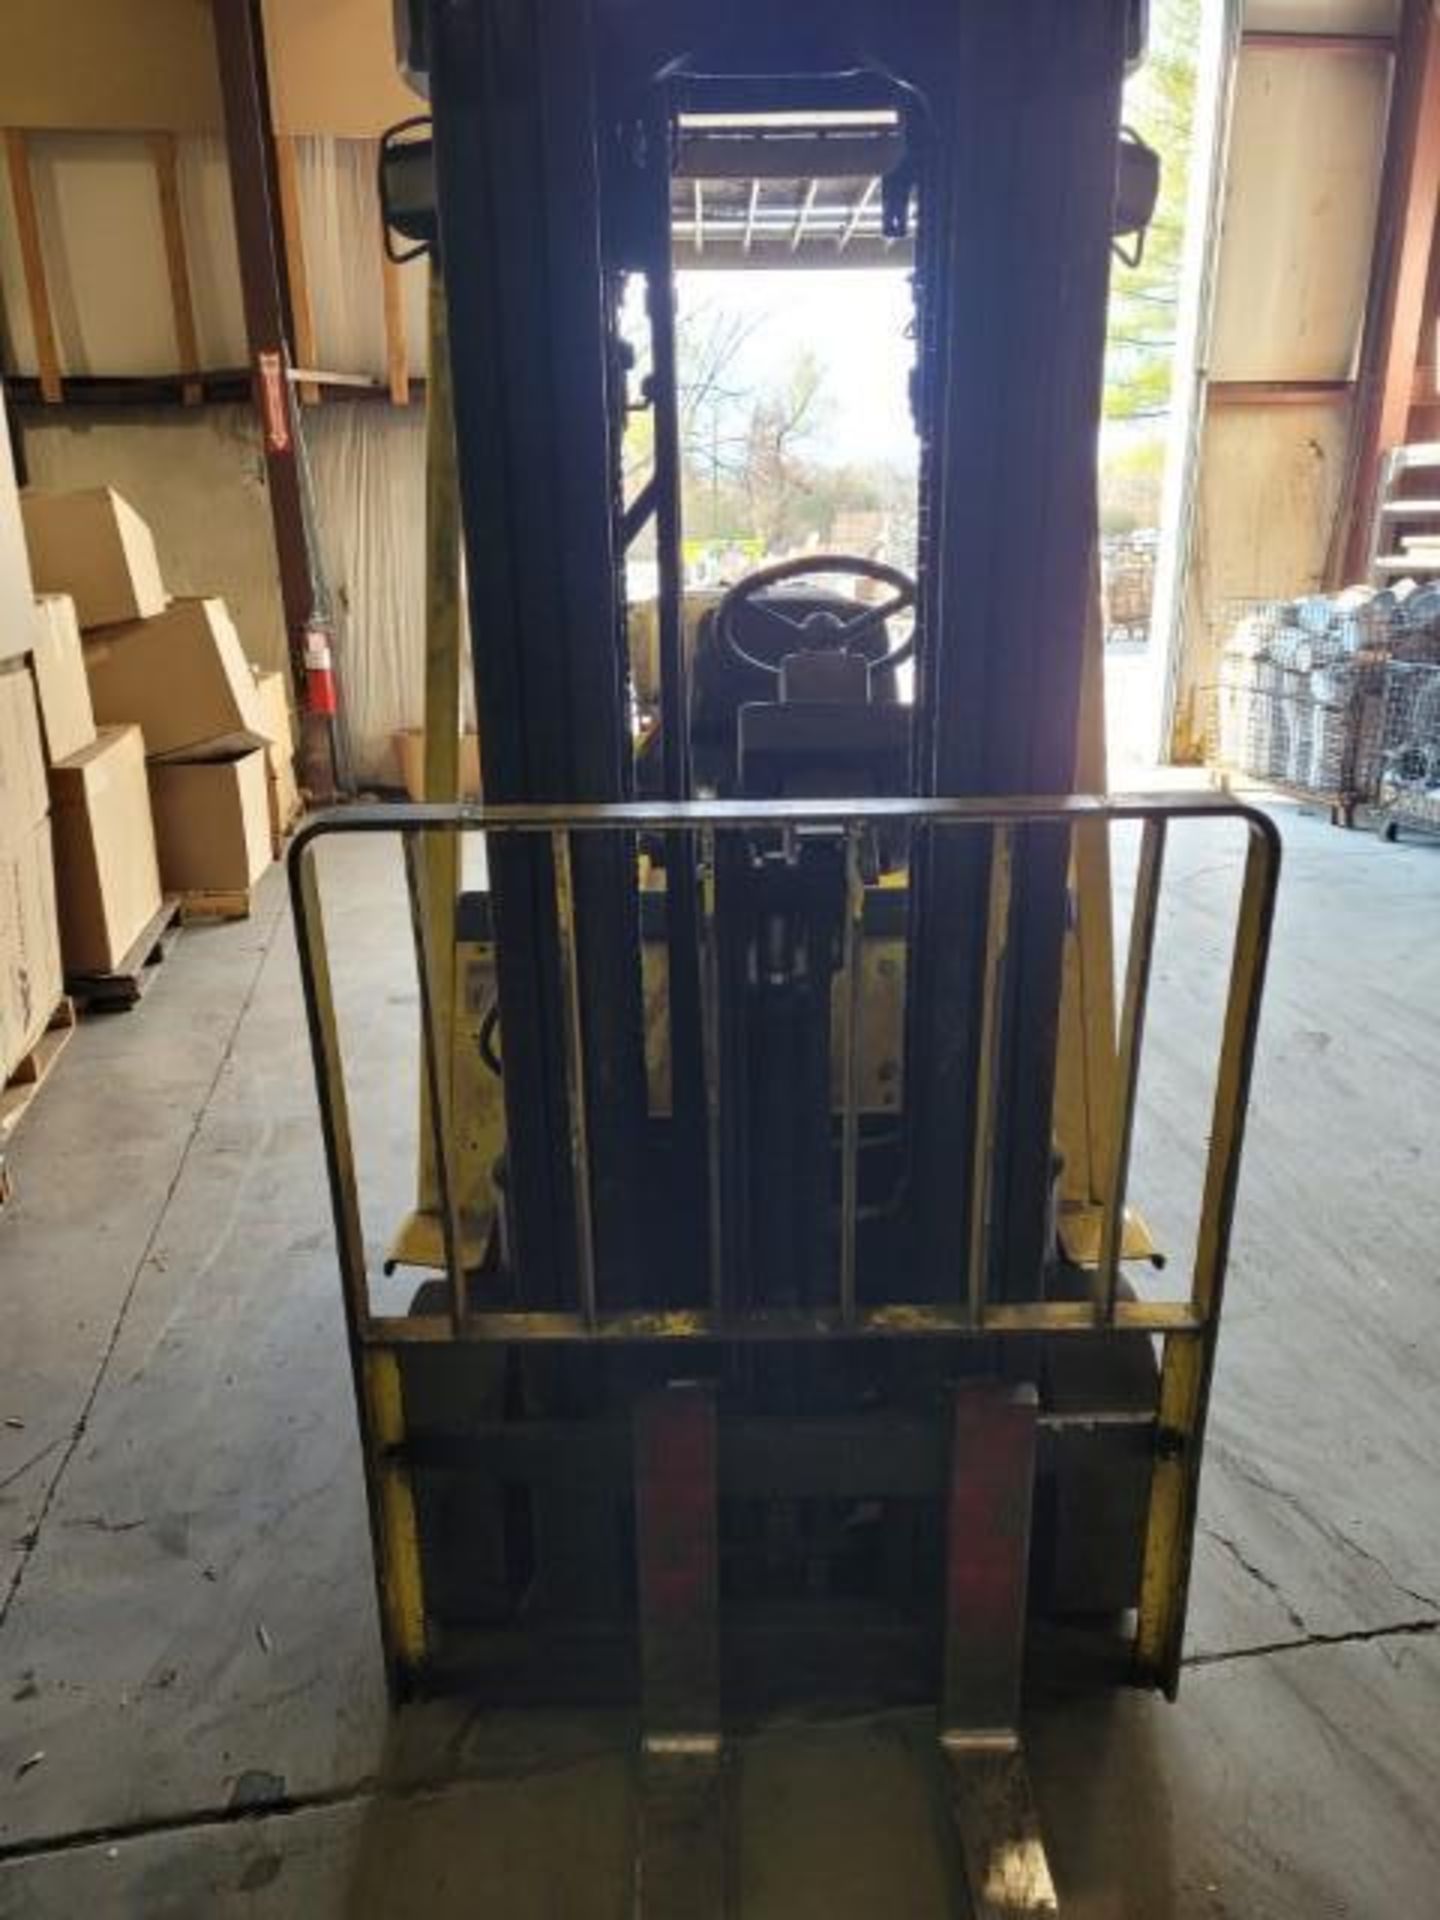 Hyster Model 50 5000 lb Capacity Forklift, 8214 Hours Indicated (DELAYED REMOVAL, CONTACT SITE MANAG - Image 4 of 4